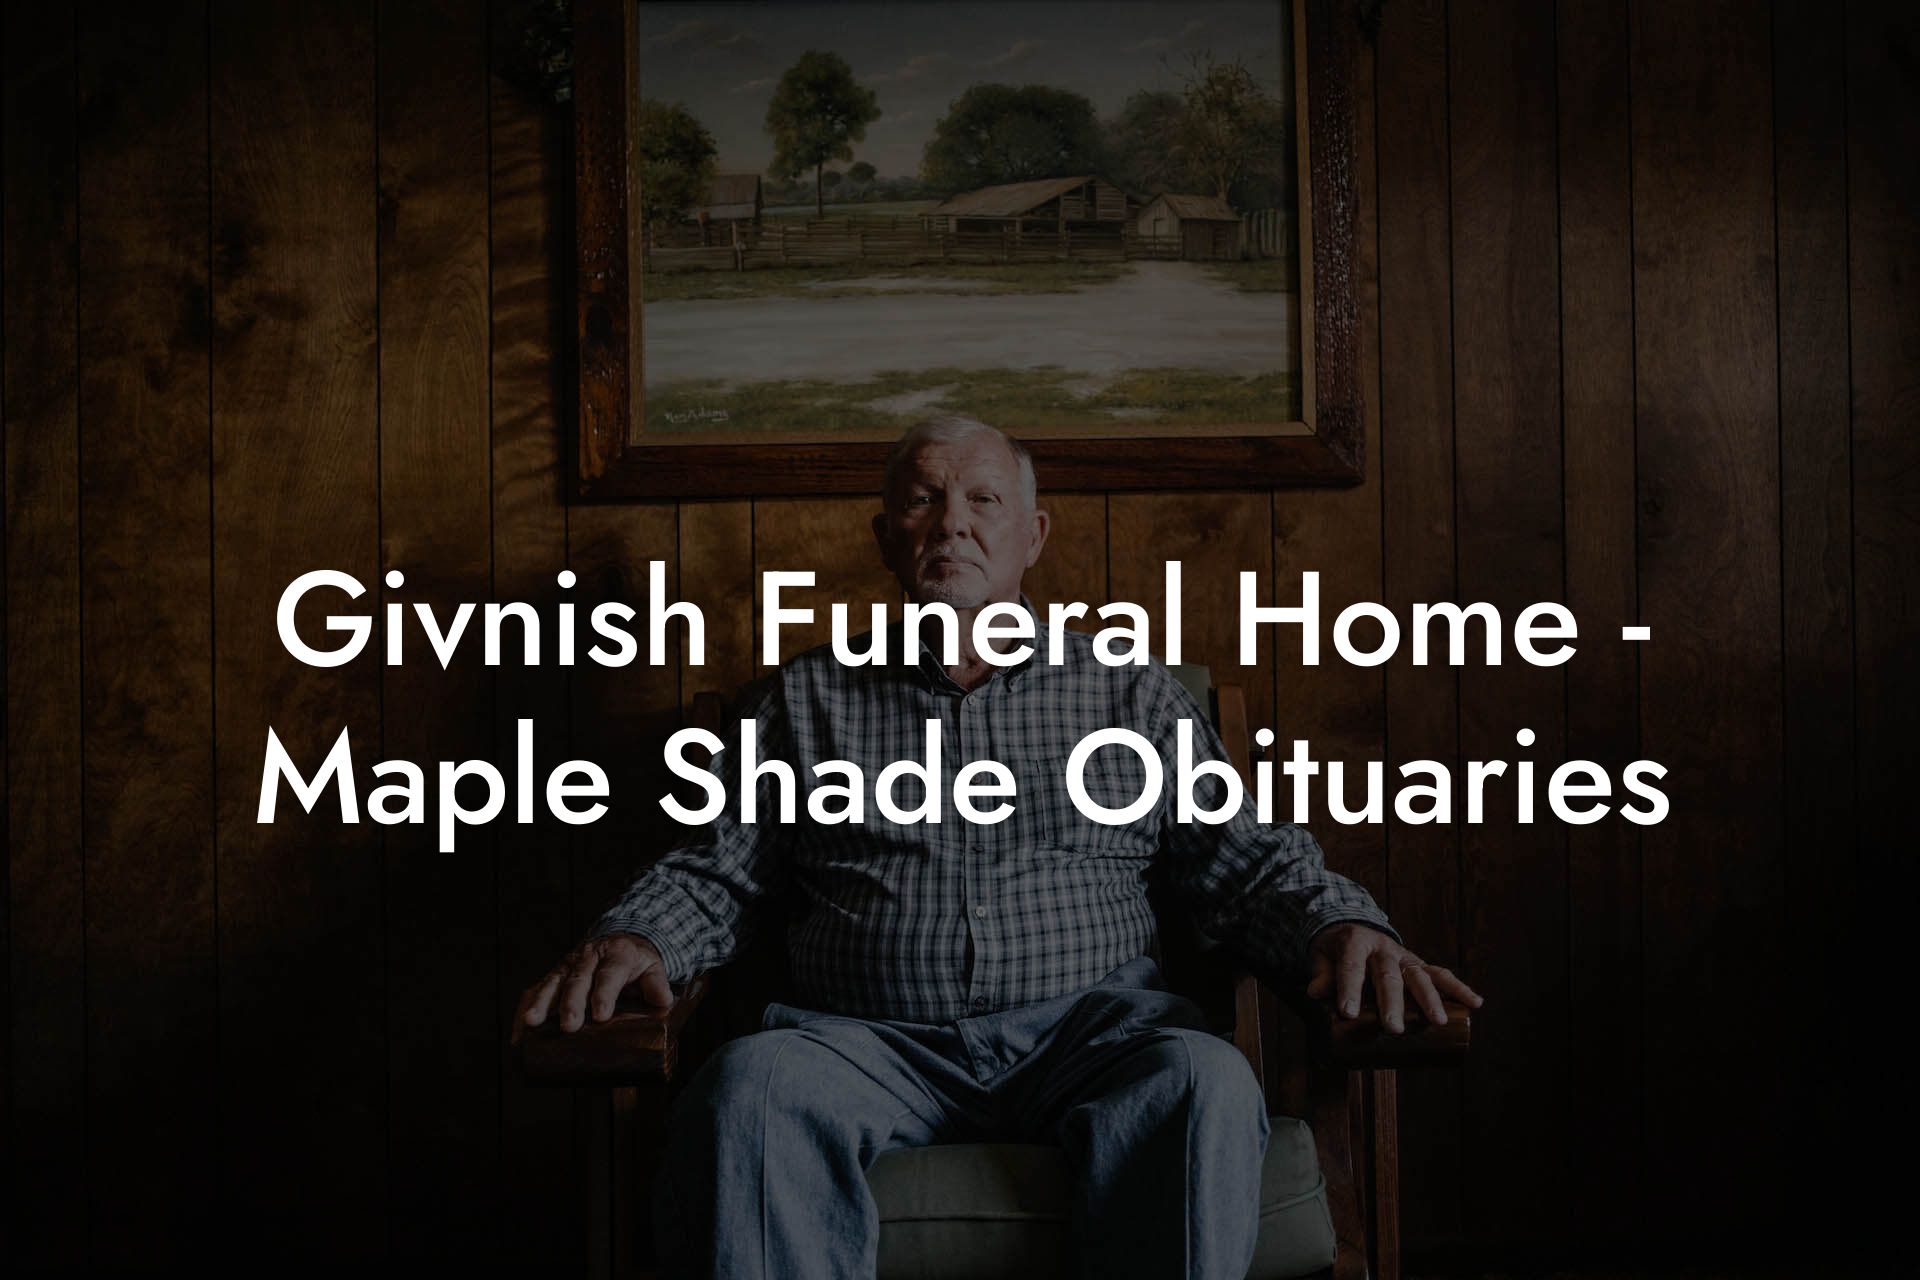 Givnish Funeral Home - Maple Shade Obituaries